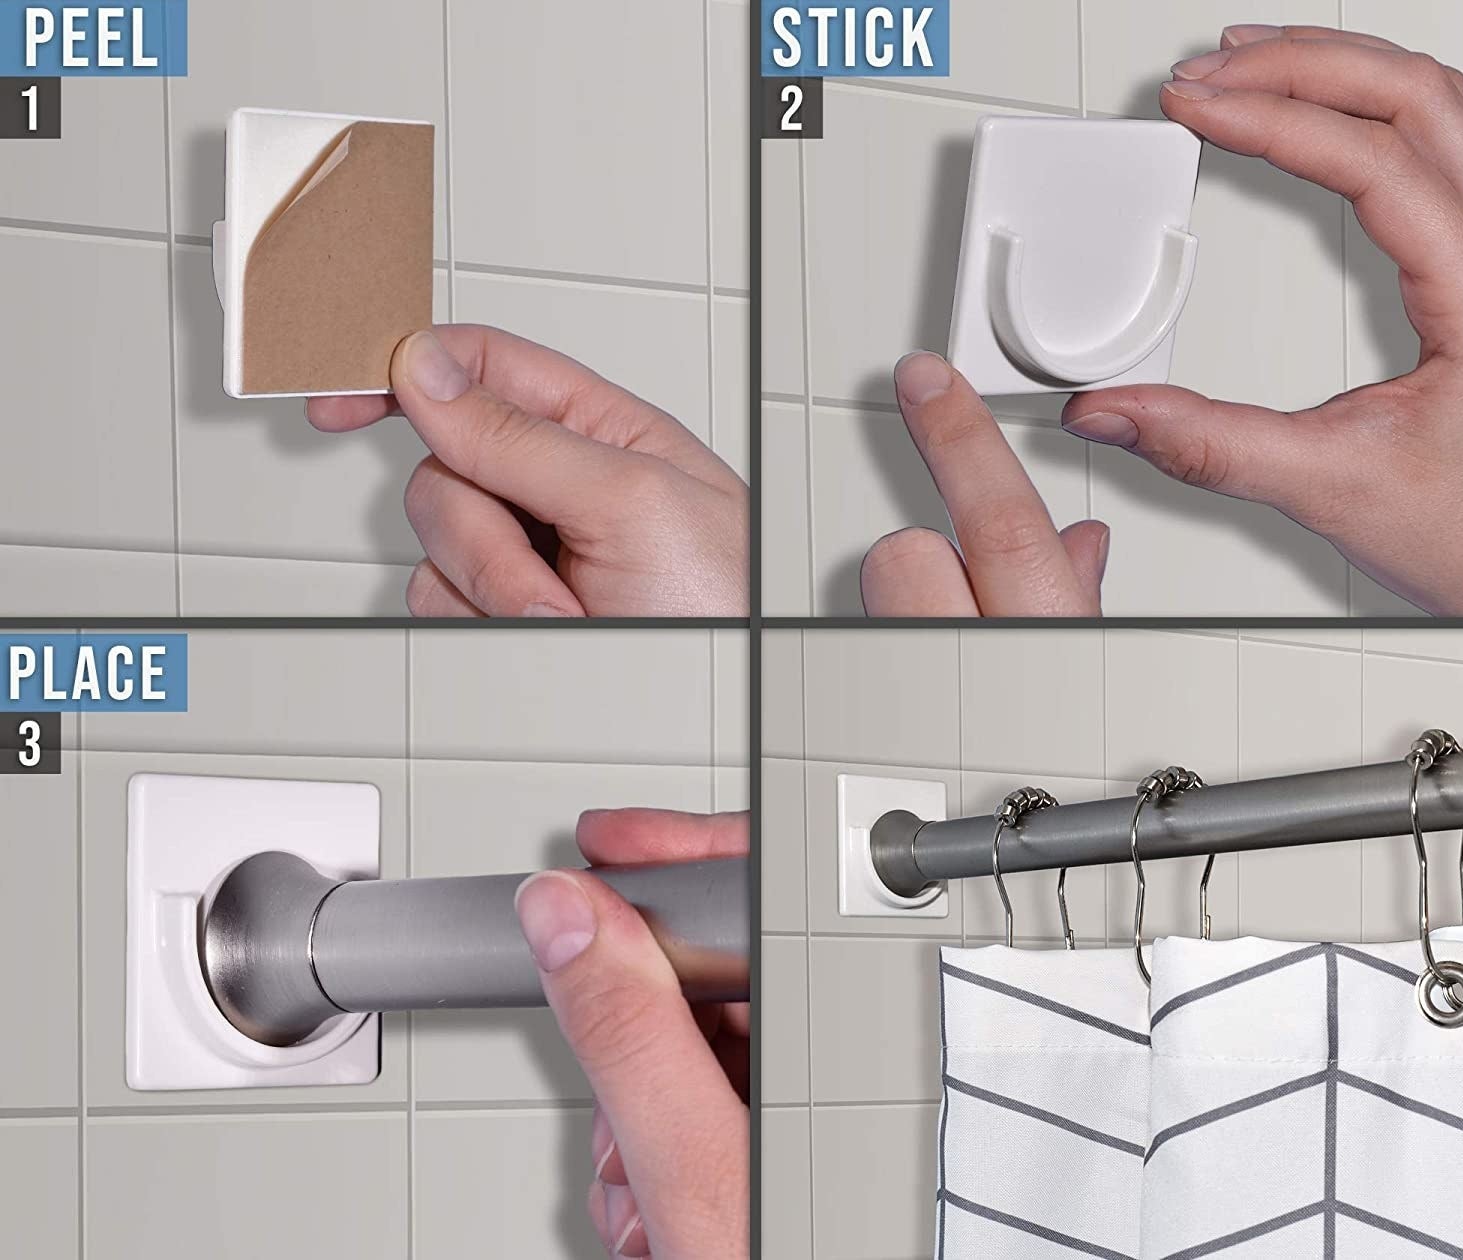 The steps of someone installing the adhesive shower rod holders